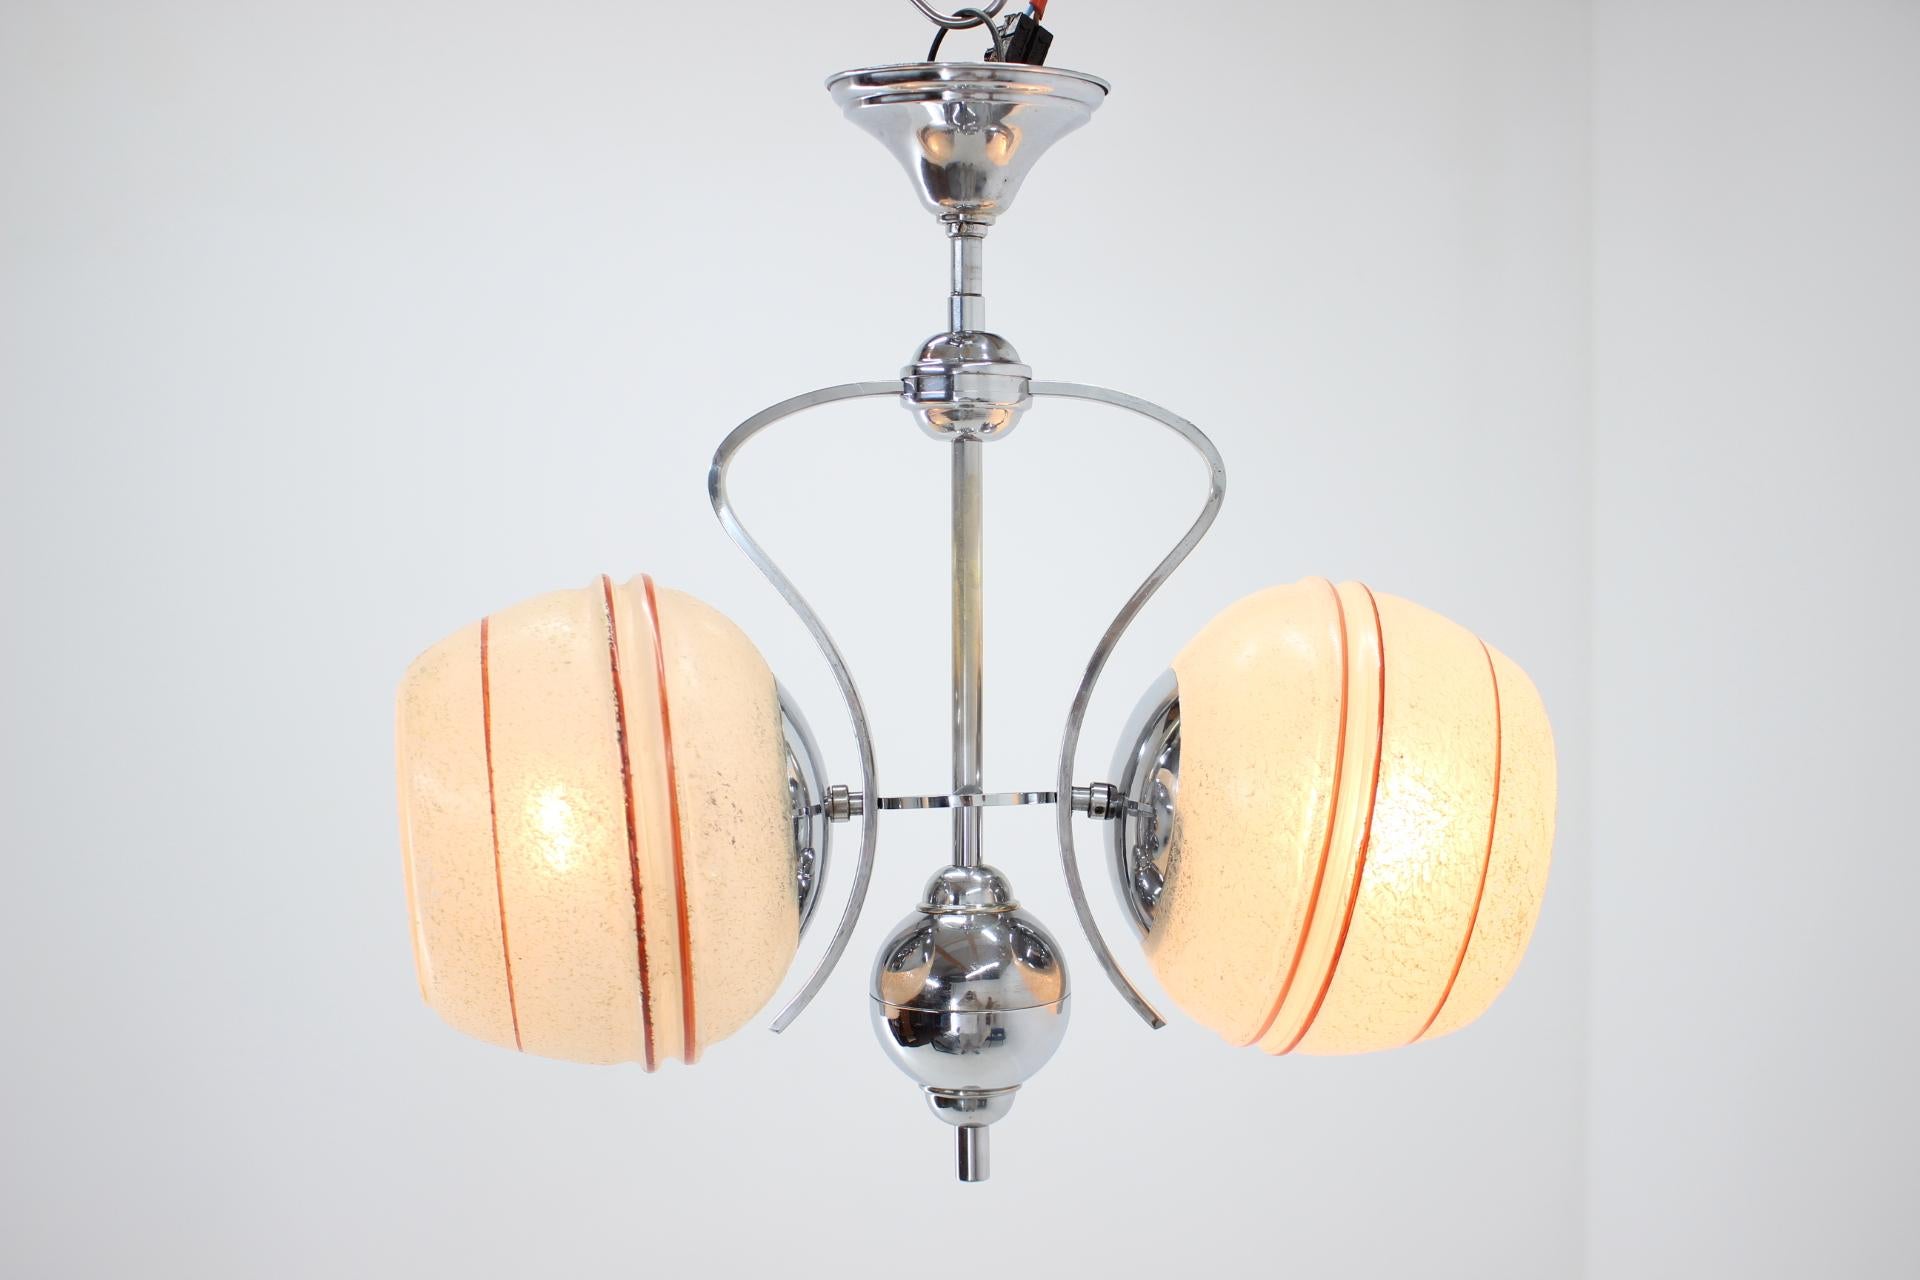 Chrome-Plated Art Deco Chandelier, 1930s For Sale 1